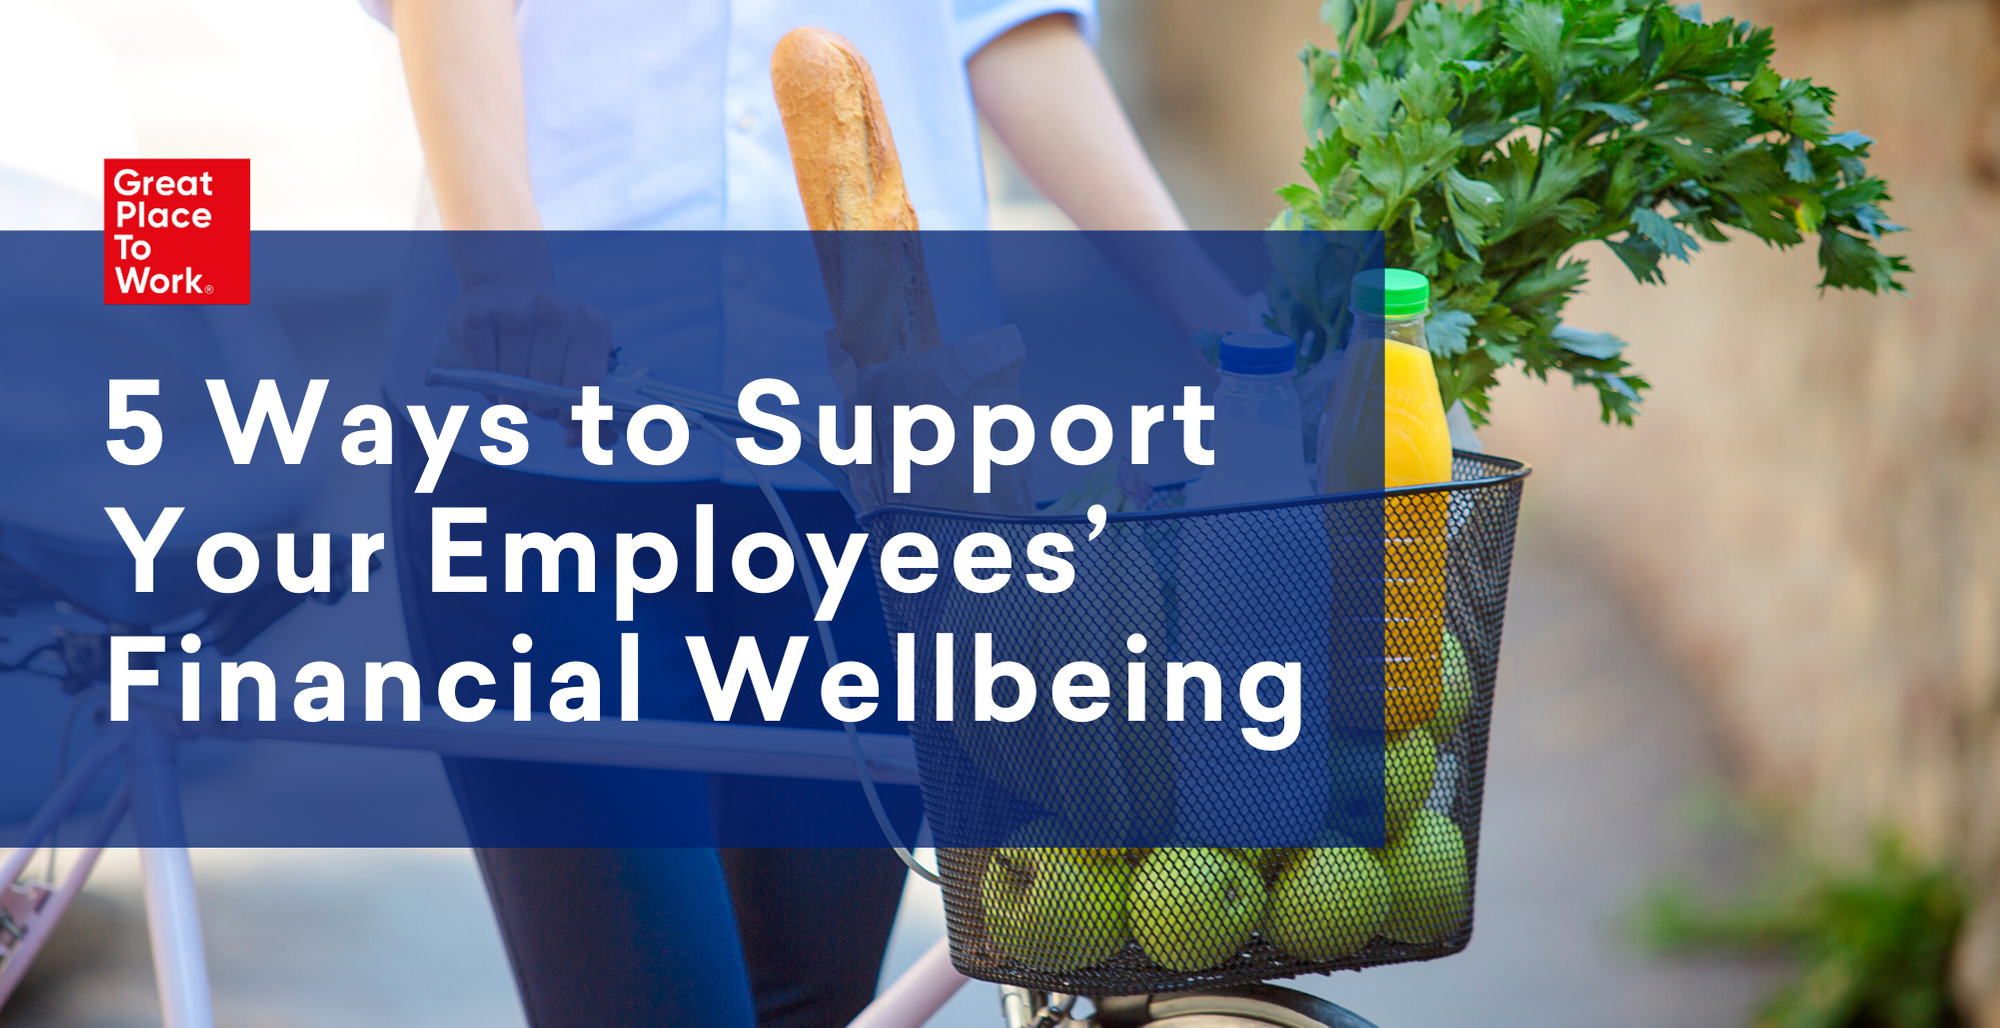 5 Ways to Support Your Employees’ Financial Wellbeing